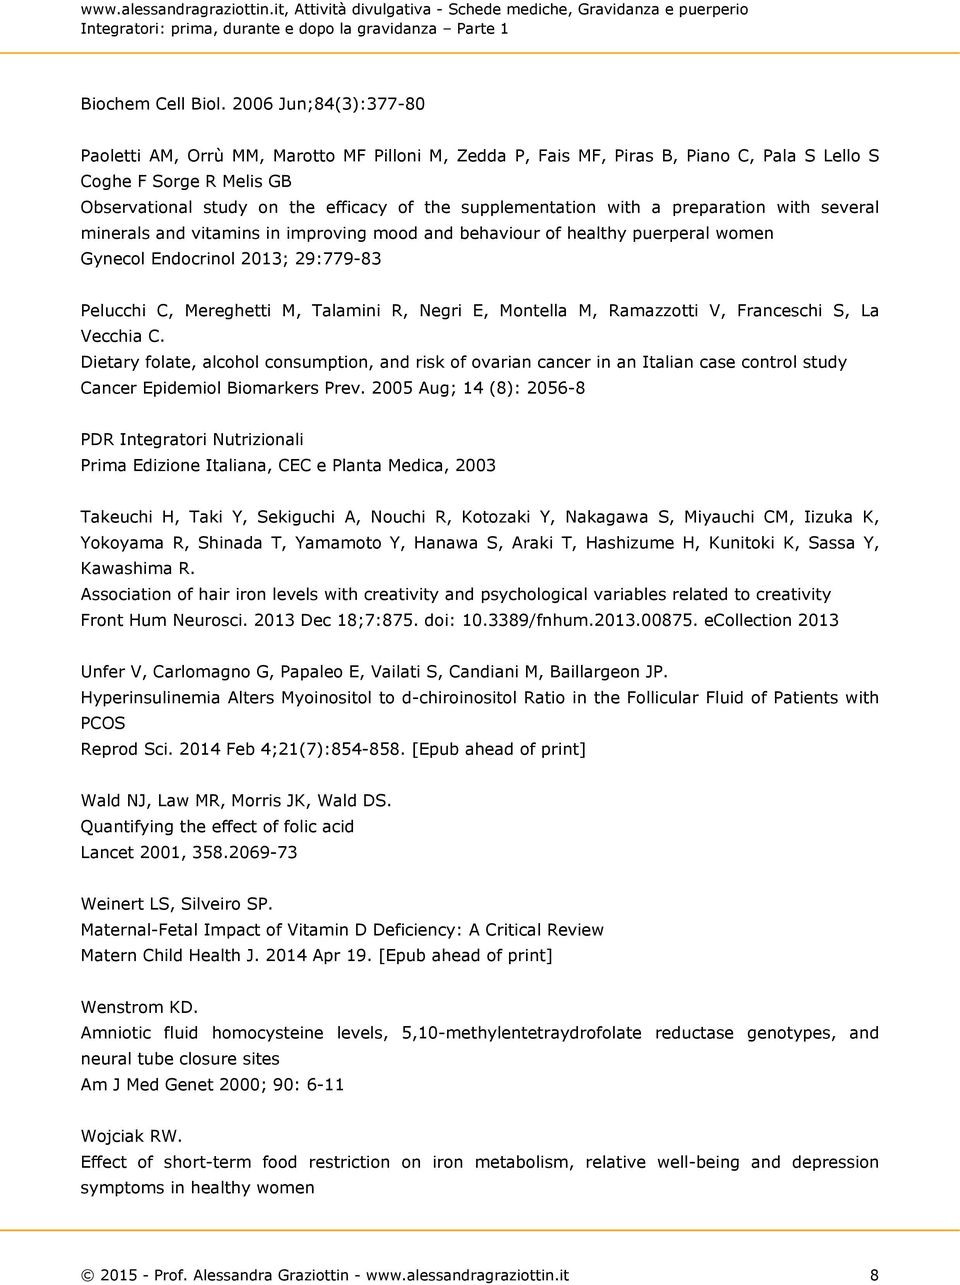 supplementation with a preparation with several minerals and vitamins in improving mood and behaviour of healthy puerperal women Gynecol Endocrinol 2013; 29:779-83 Pelucchi C, Mereghetti M, Talamini